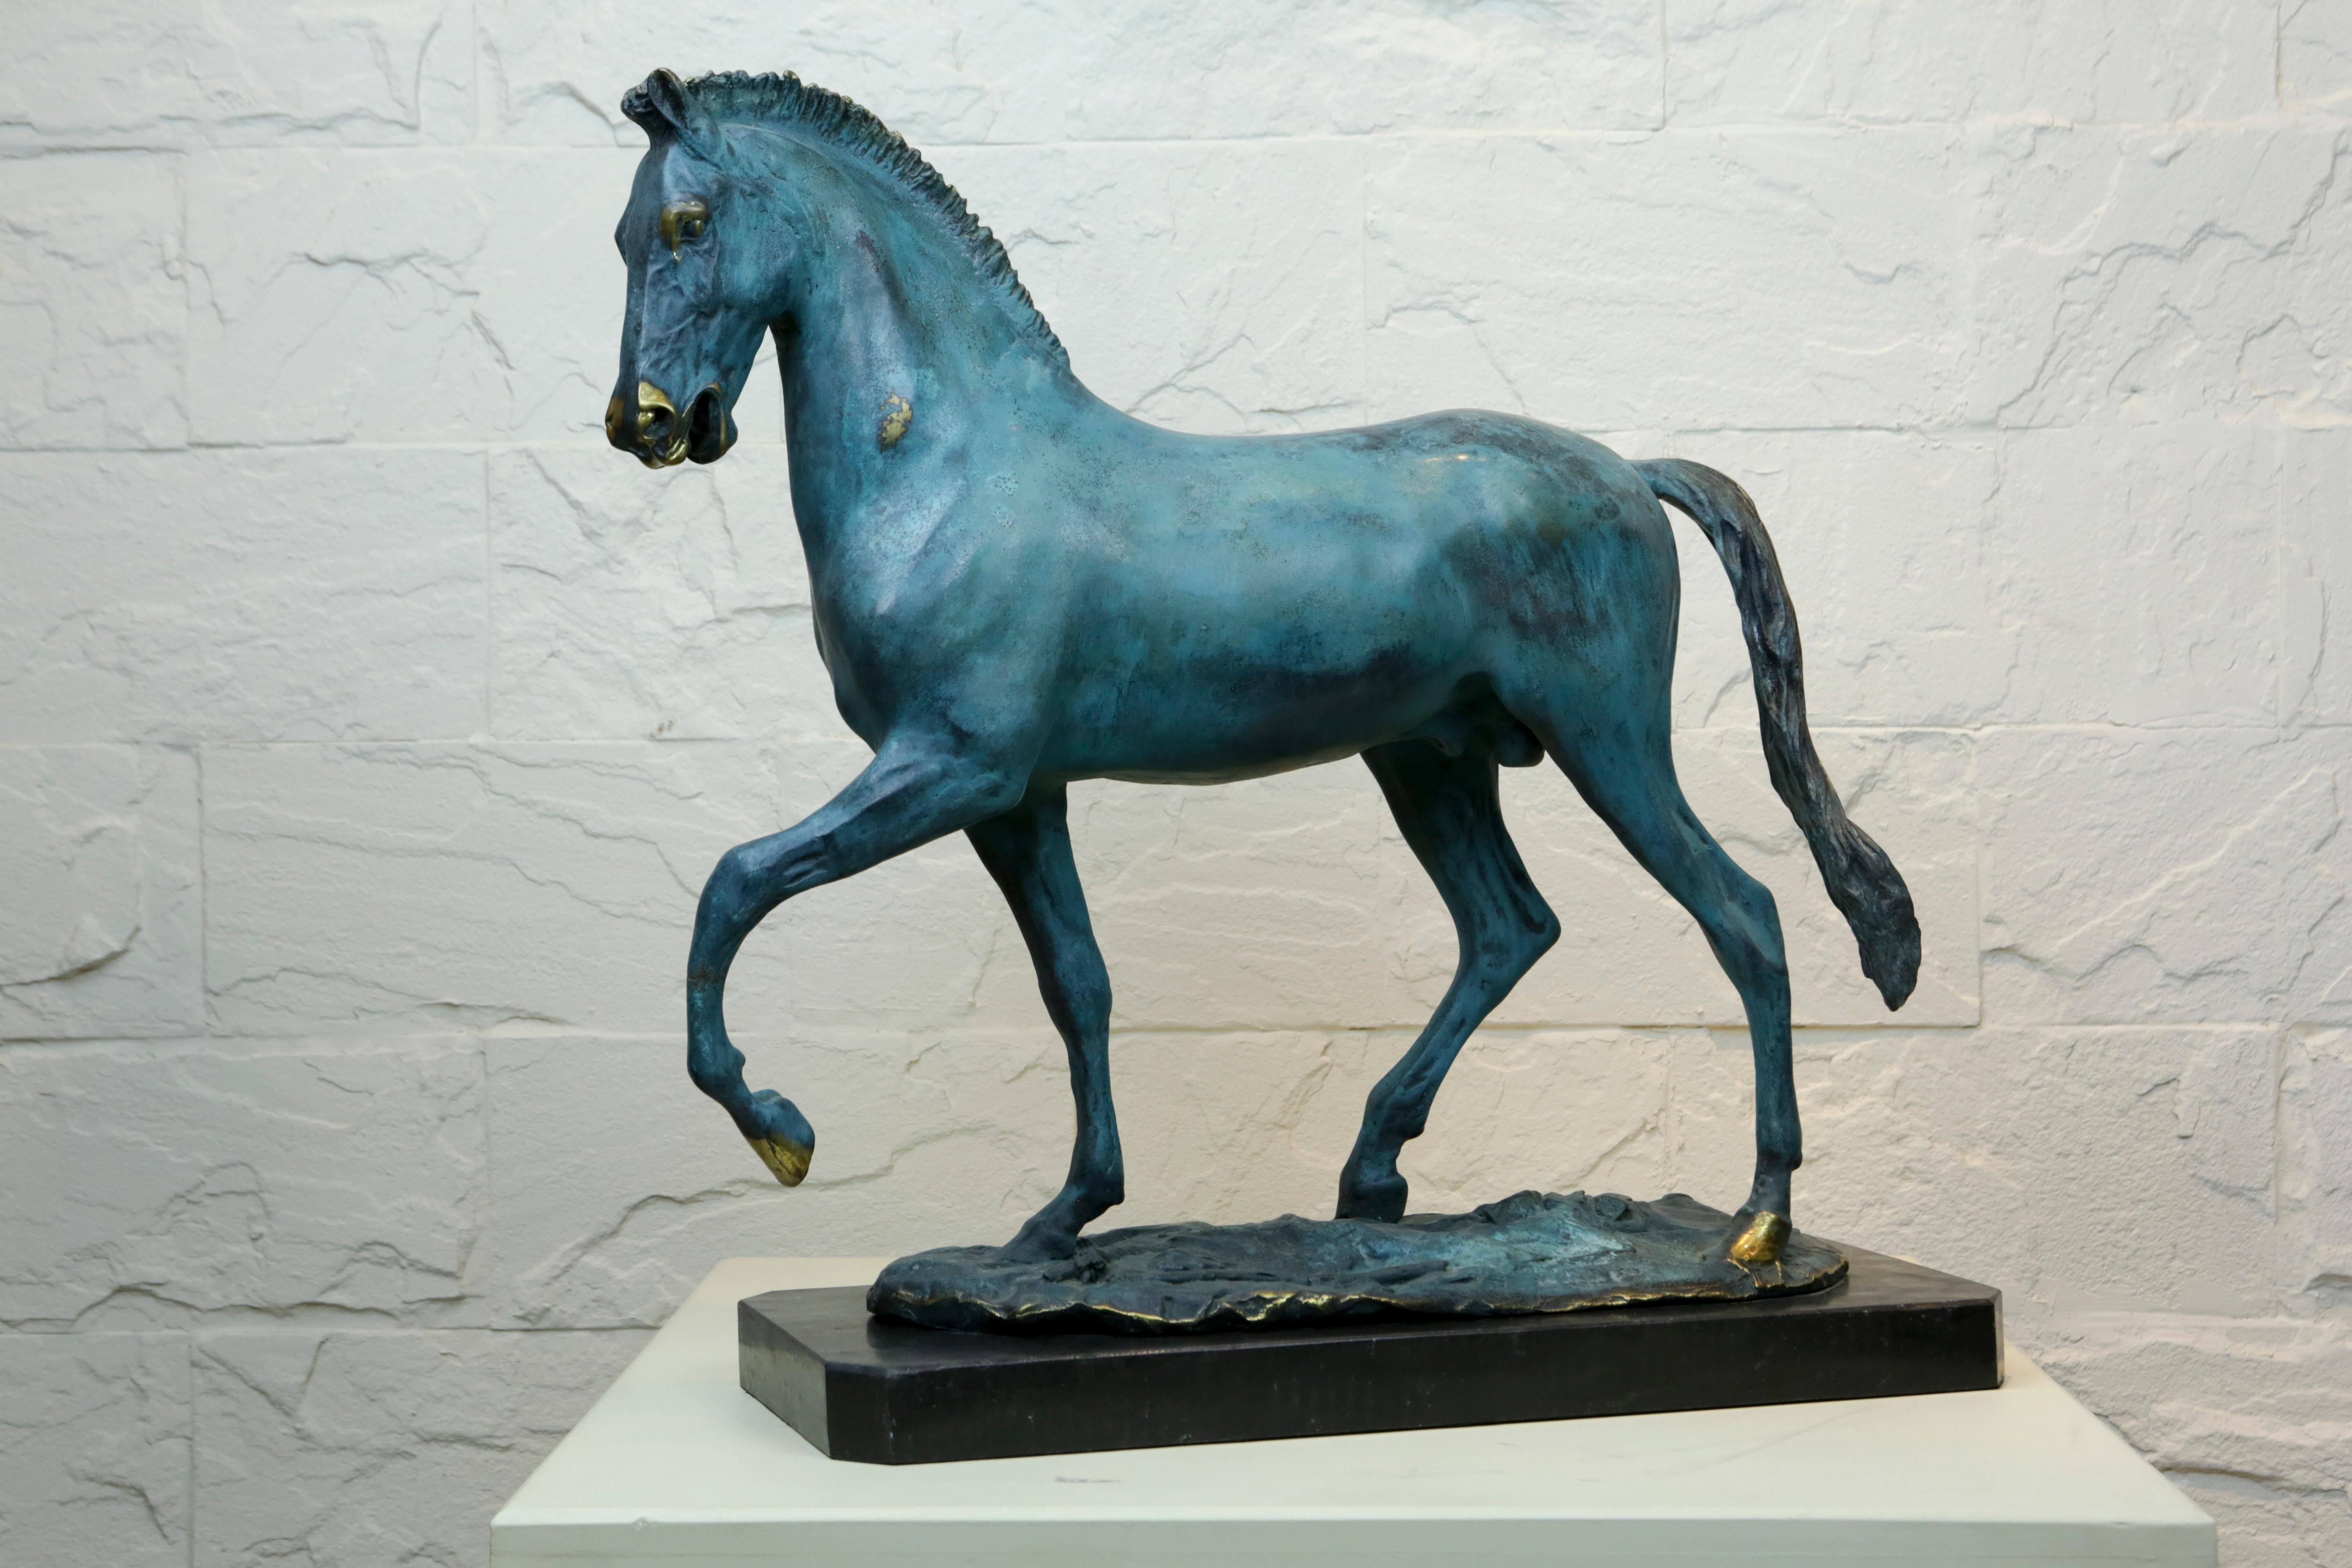 Bronze Roman War Horse.

When someone speaks of the Roman Empire, an initial thought to cross a person’s minds is the magnificent size of her dominions. Because of this vastness, Rome had to maintain an army that was capable of crushing any